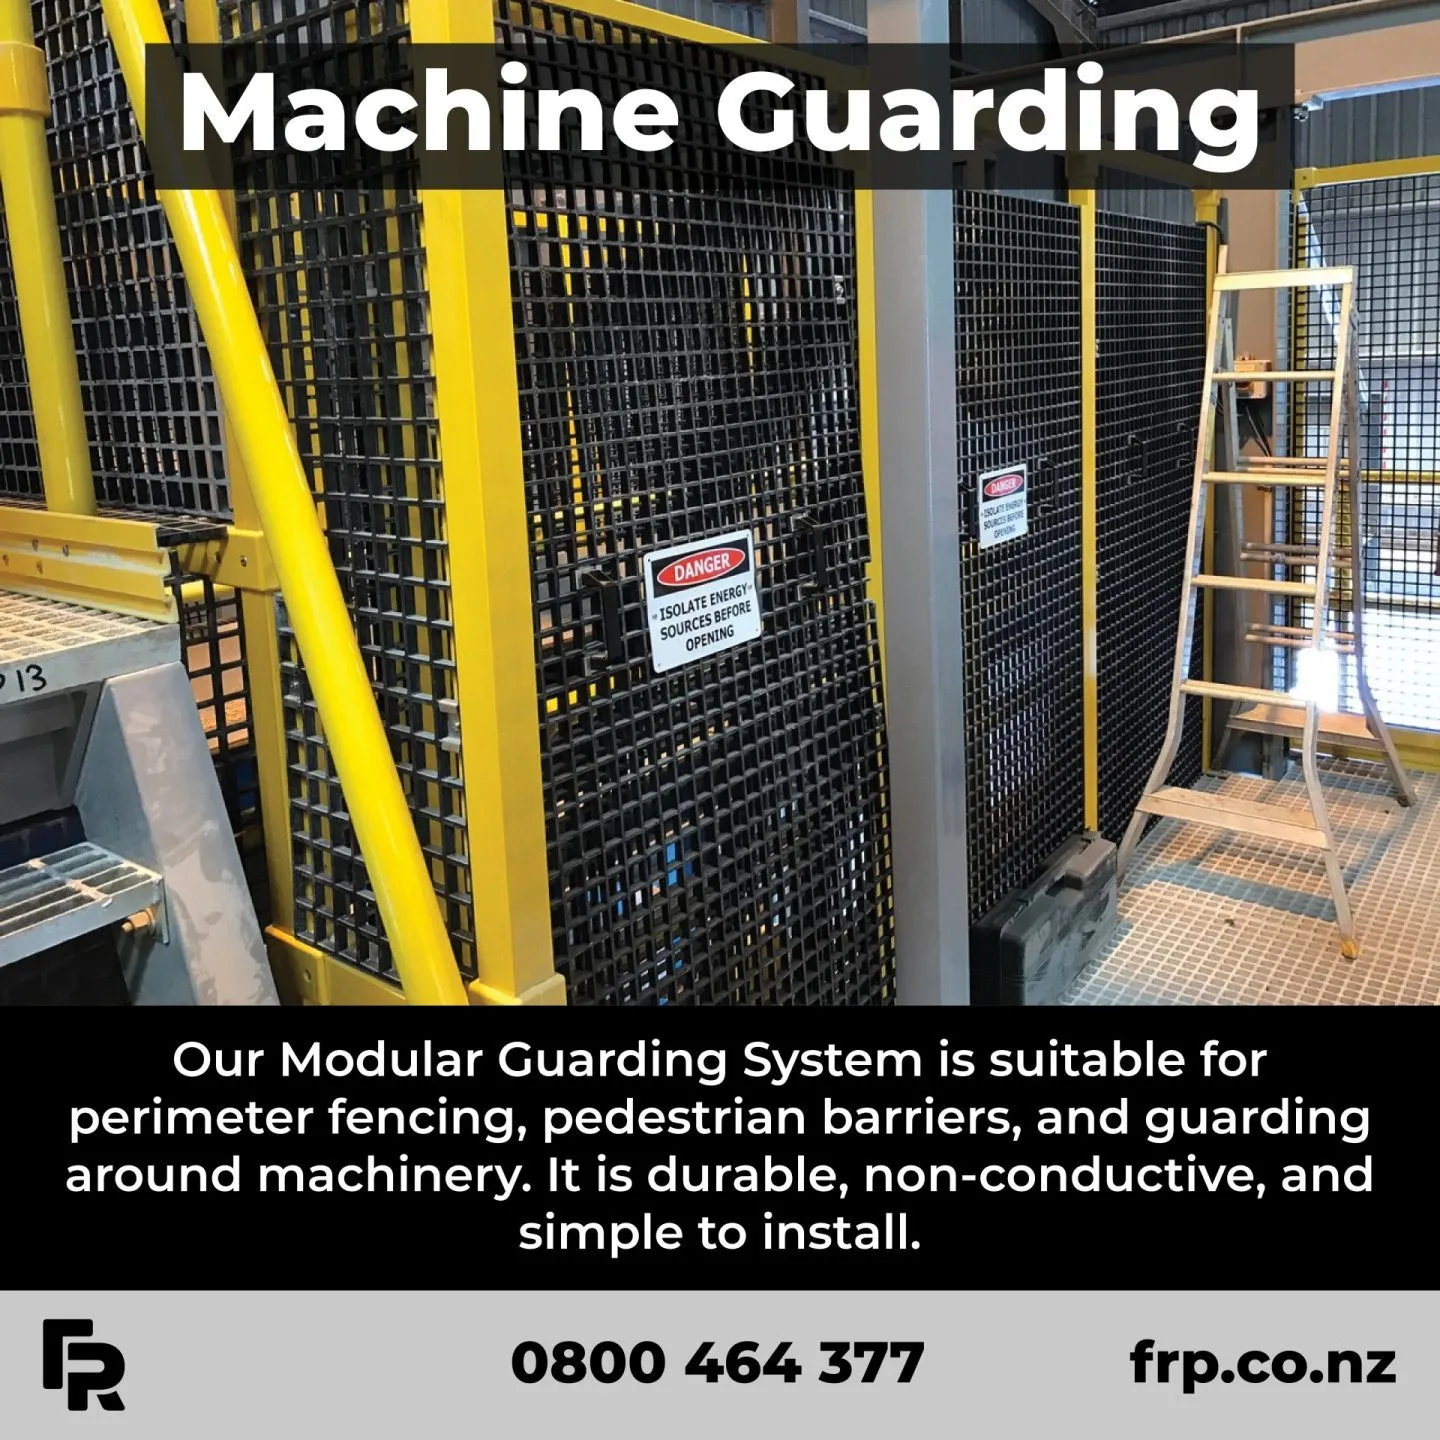 Let us know how we can help!

#frp #frpproducts #industrial #commercial #engineers #engineering #guardingsystems #machinery #healthandsafety #nzarchitects